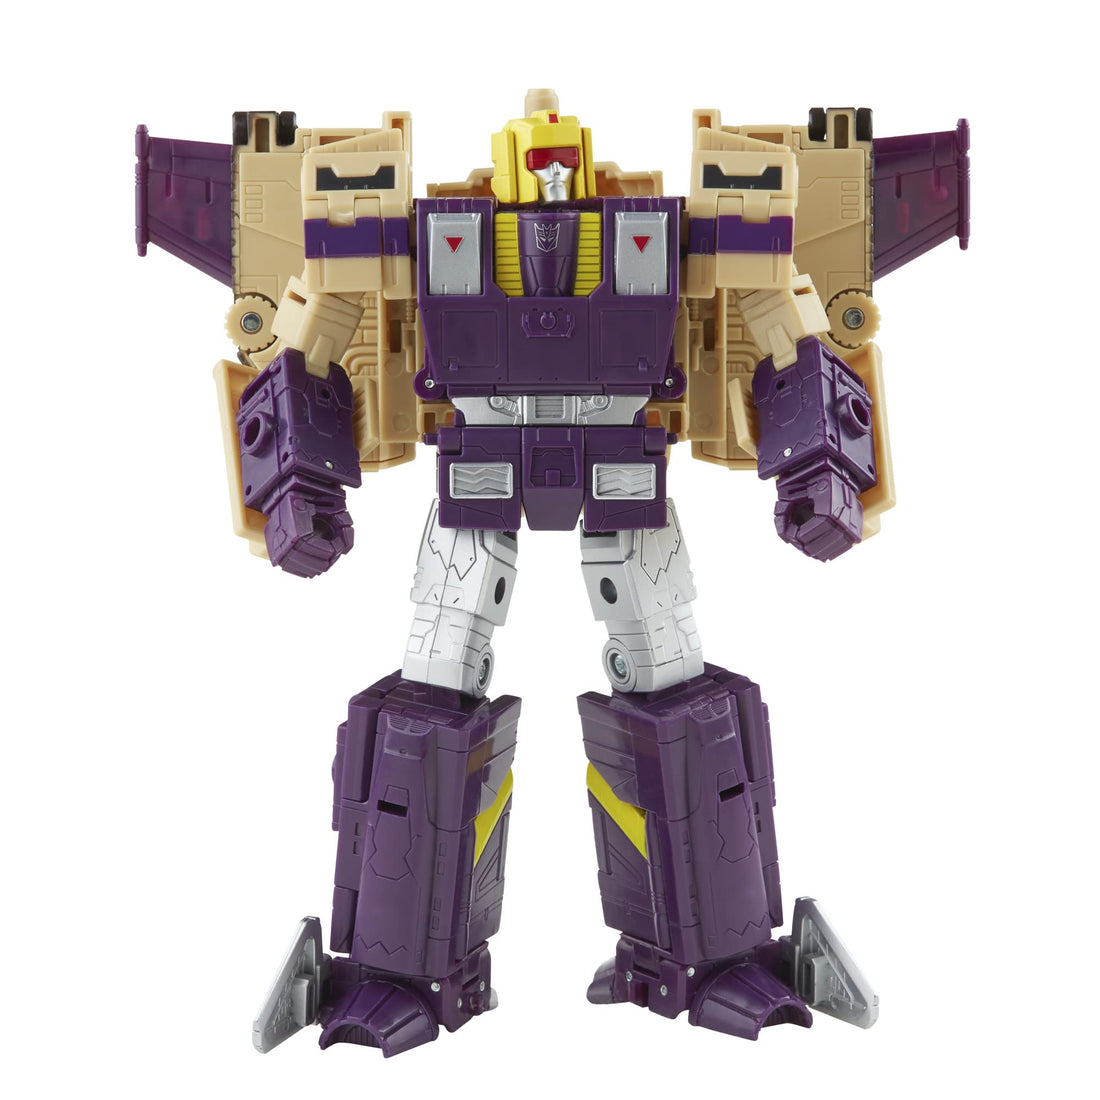 Transformers Toys Generations Legacy Series Leader Blitzwing Triple ChangerAction Figure - 8 and Up, 7-inch, Multicolour (F3062)